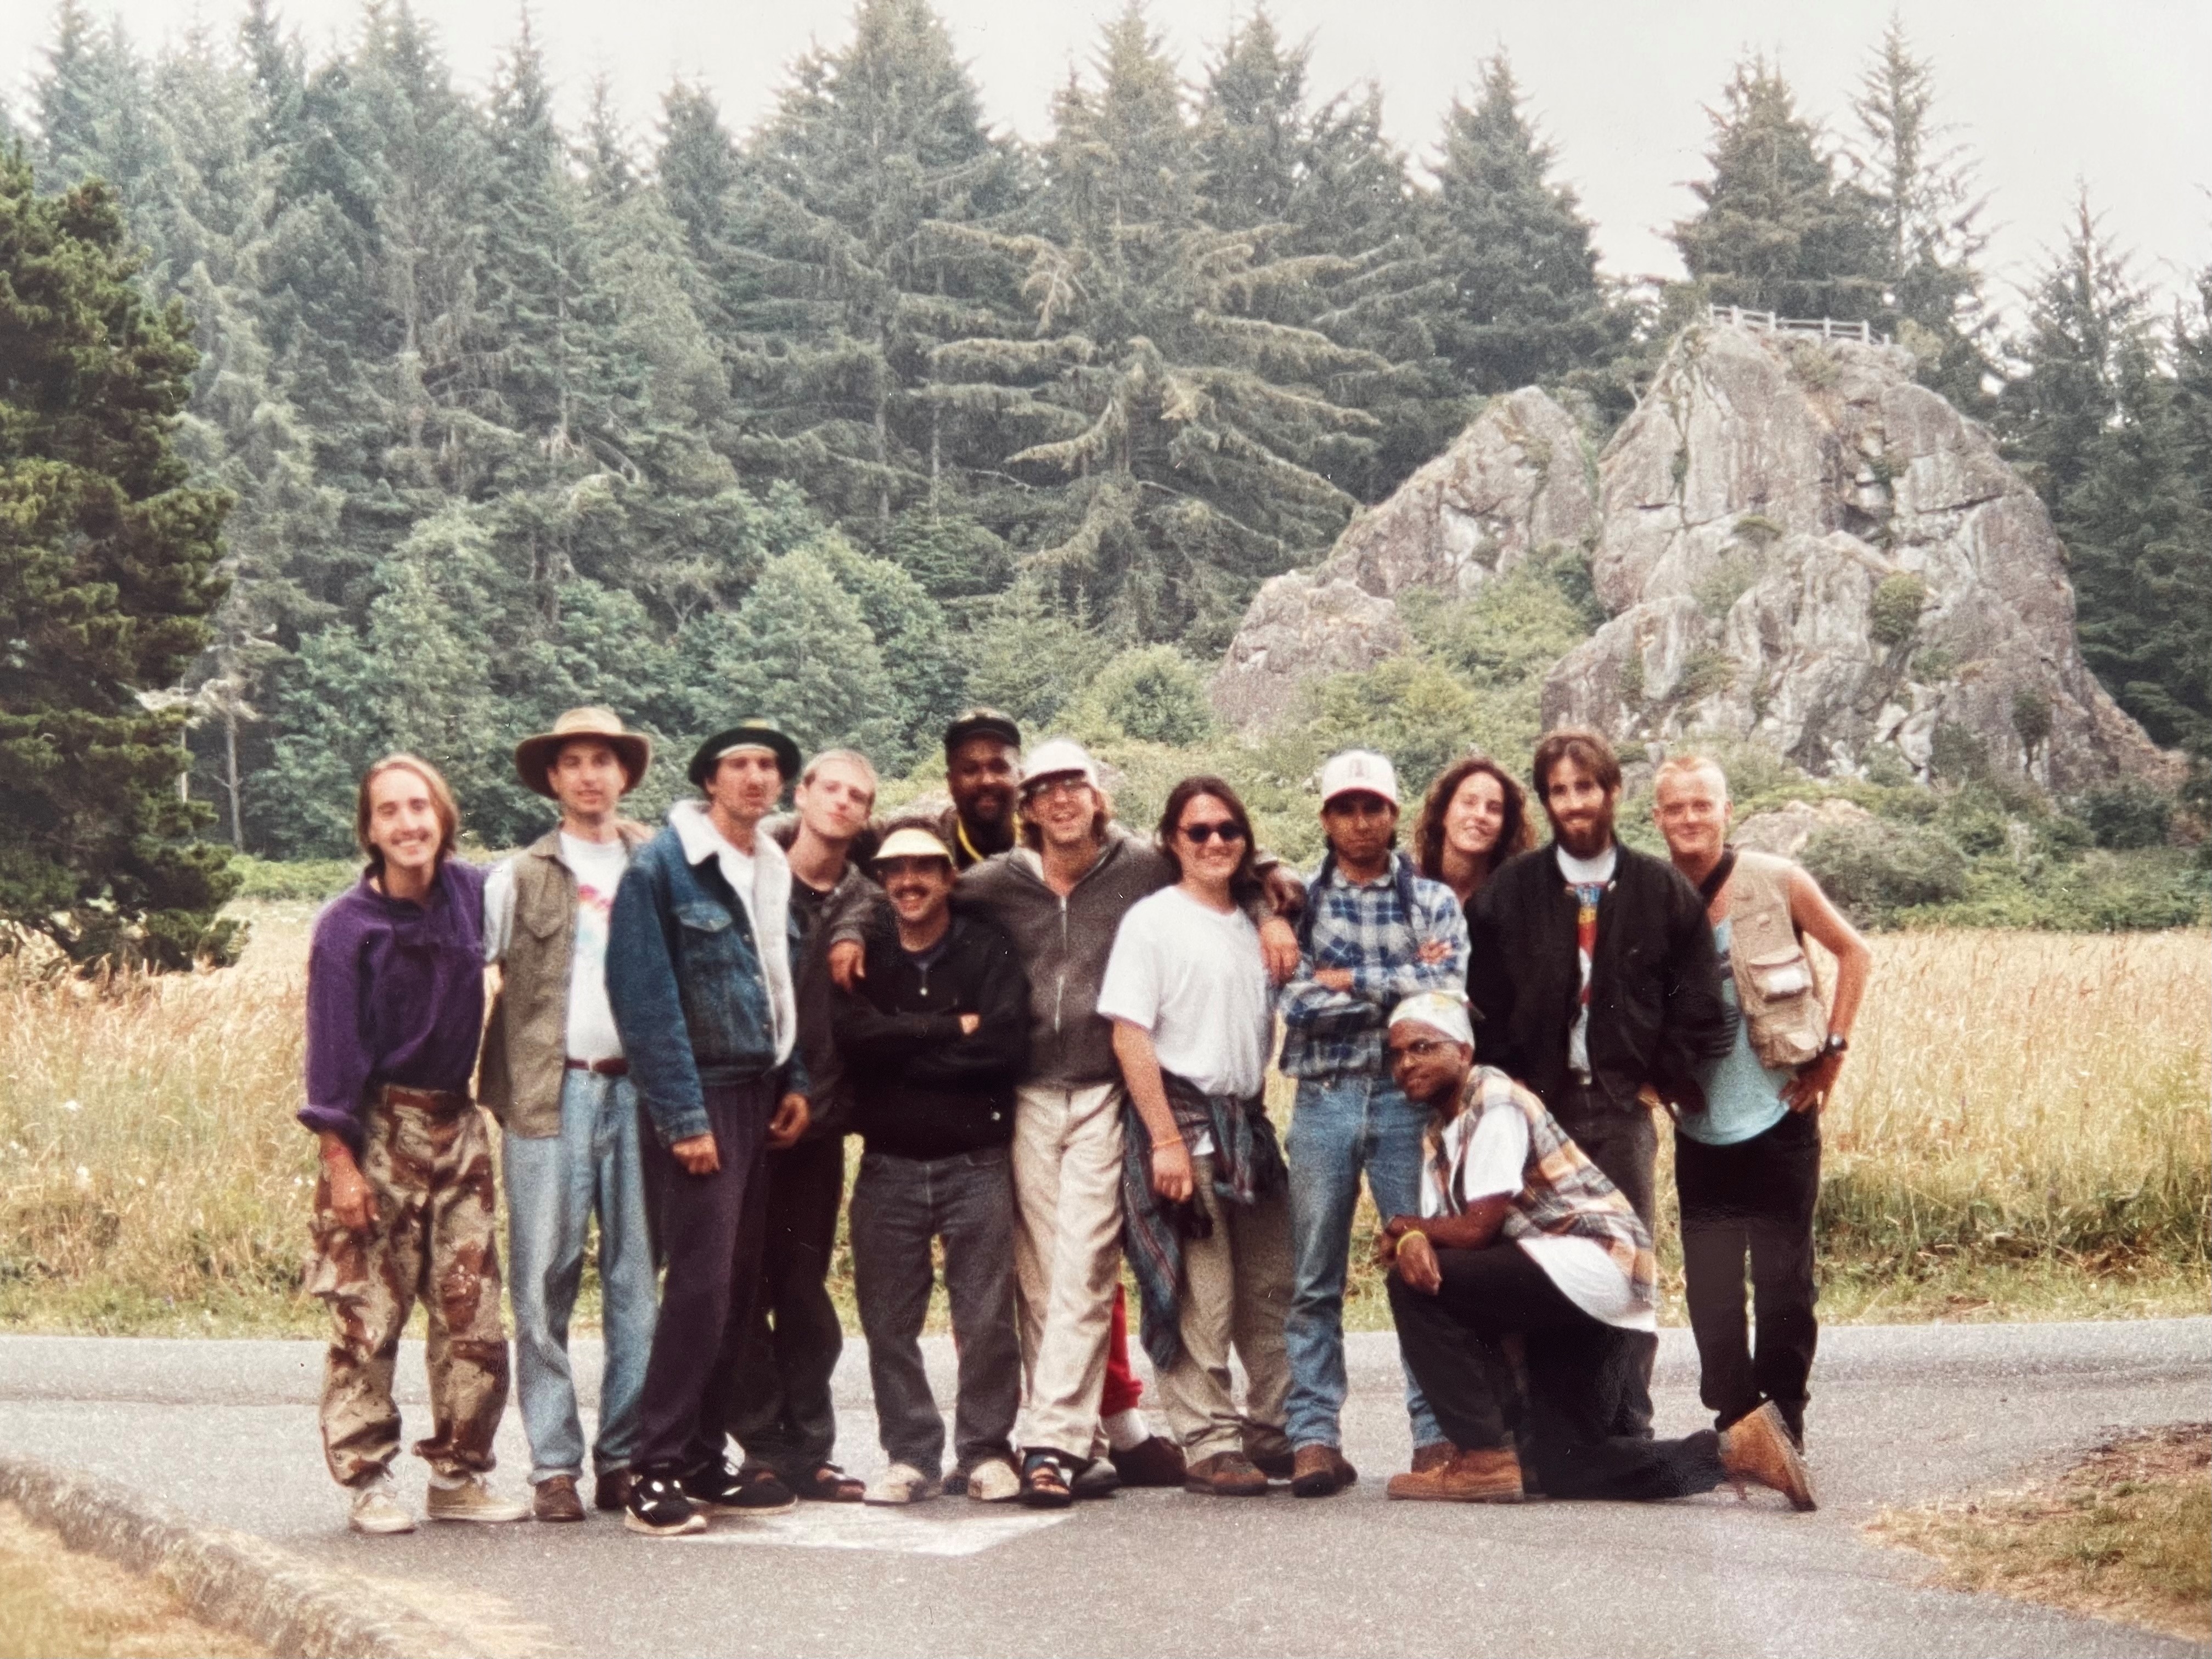 Terry L. Stogdell with friends in a wilderness area